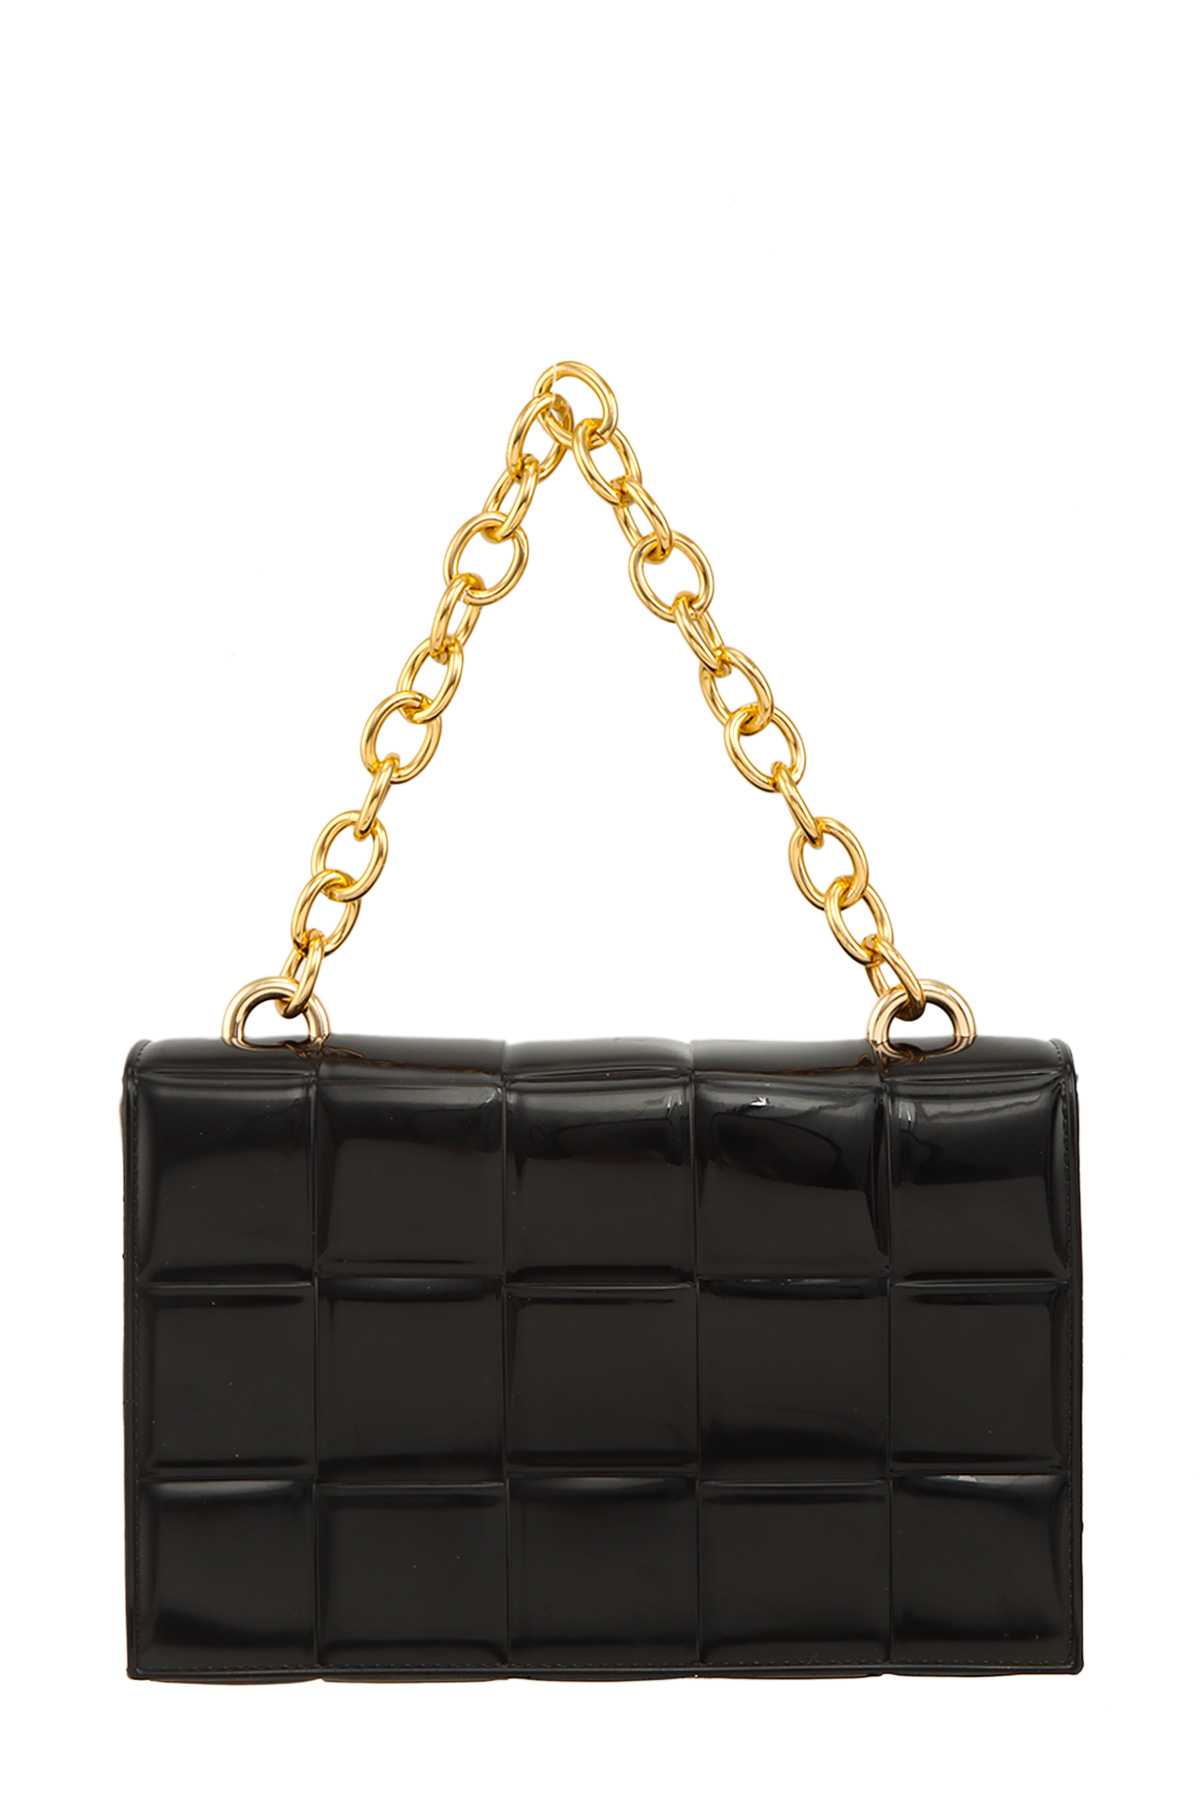 Square Shaped Chain Crossbody Jelly Bag